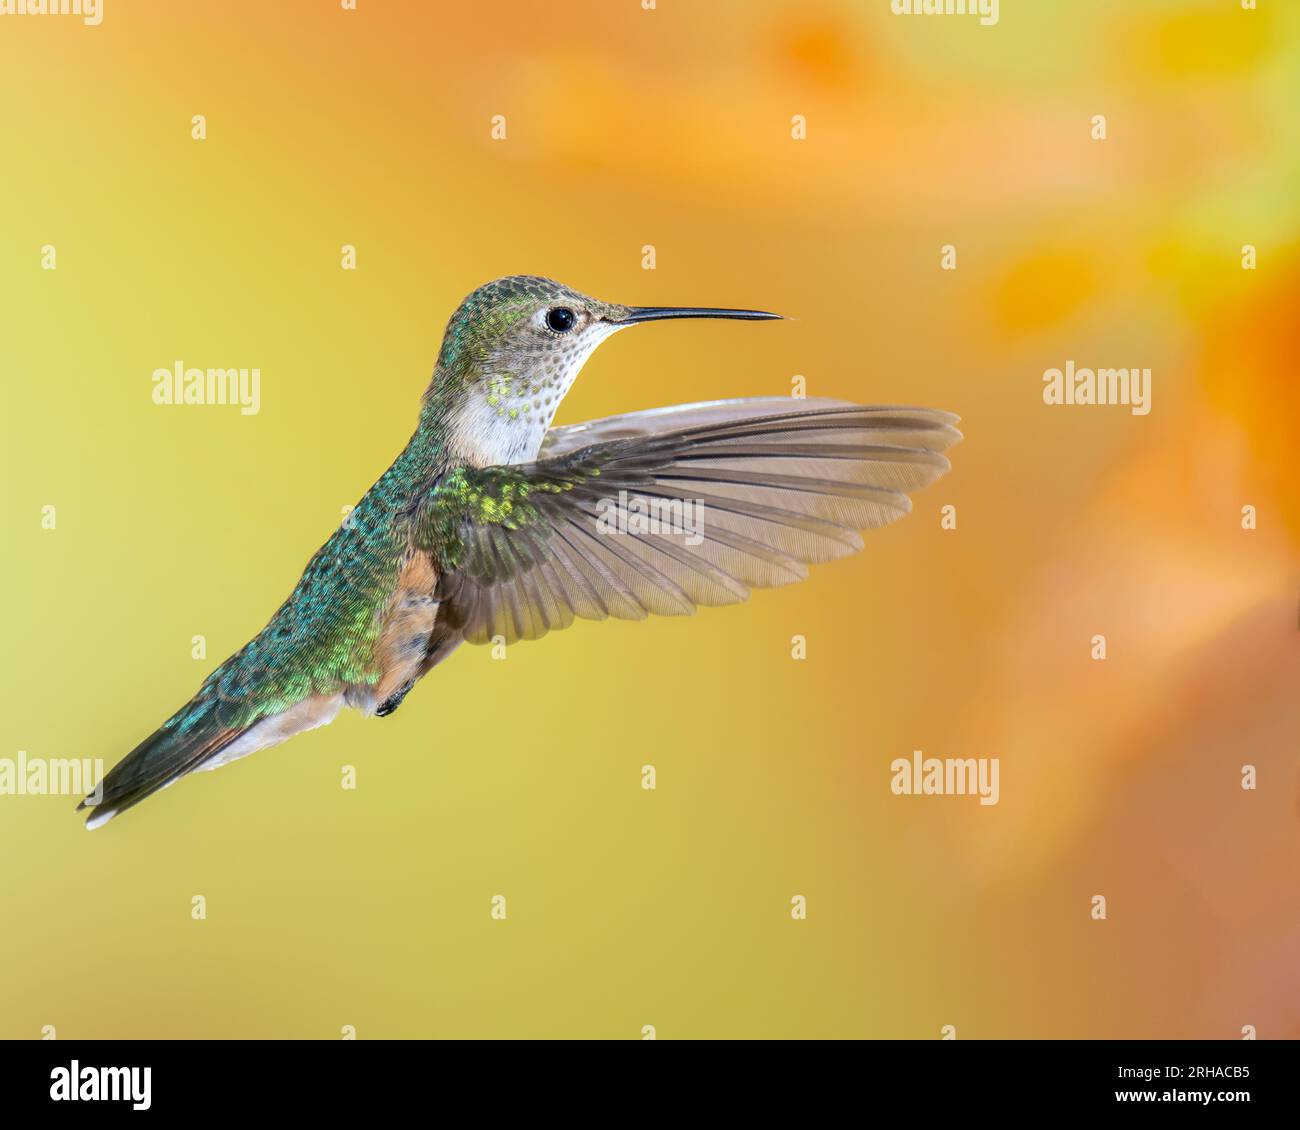 Broad-Tailed Hummingbird in Flight, Female or Immature Male Stock Photo